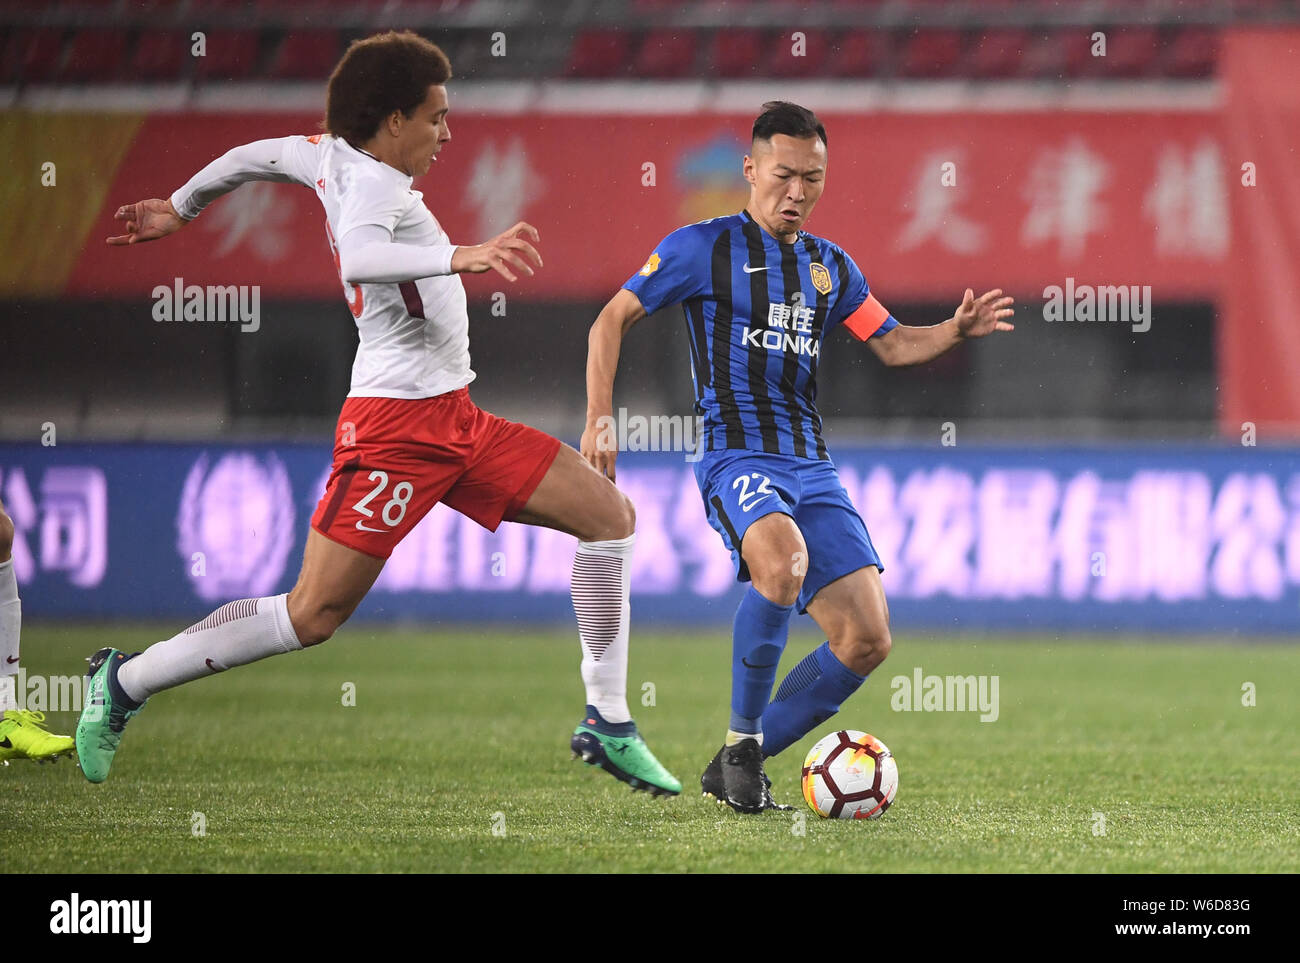 Belgian football player Axel Witsel of Tianjin Quanjian, left, challenges Wu Xi of Jiangsu Suning in their sixth round match during the 2018 Chinese F Stock Photo